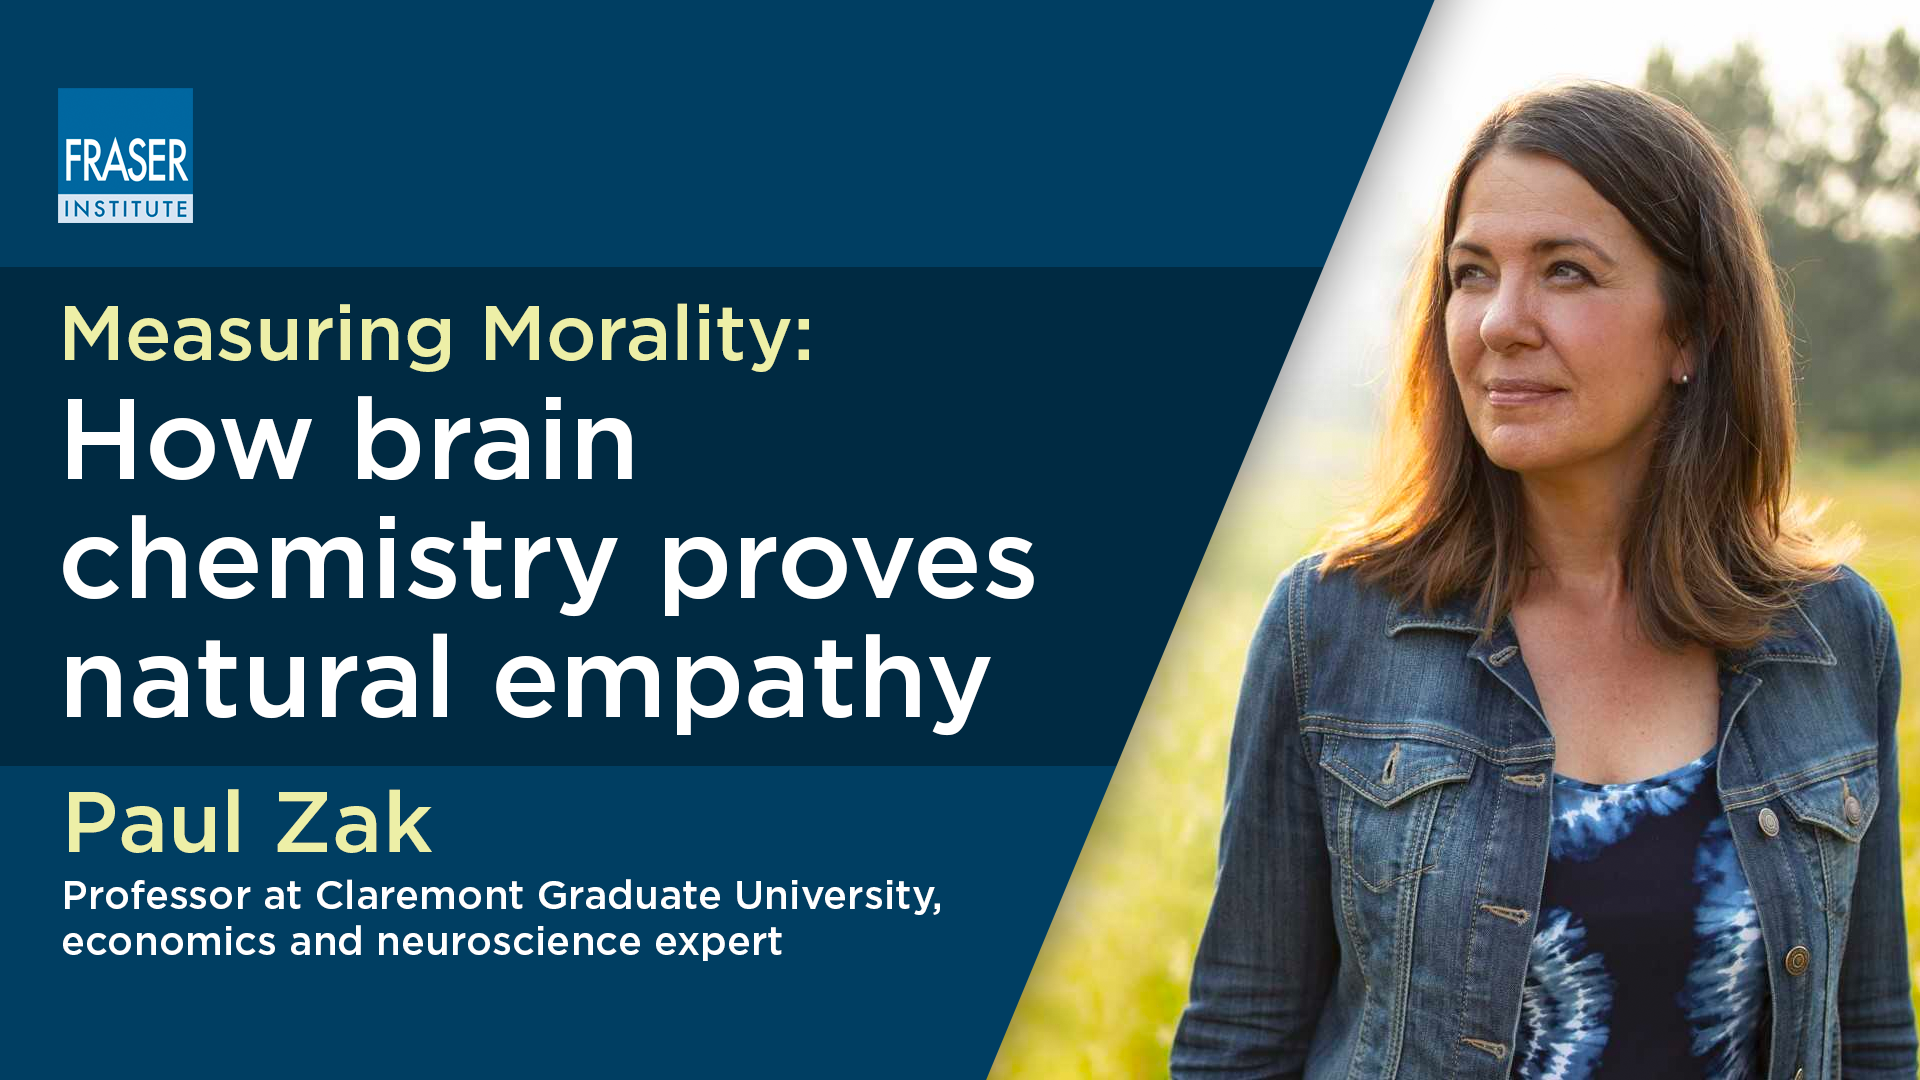 Measuring Morality: how brain chemistry proves natural empathy